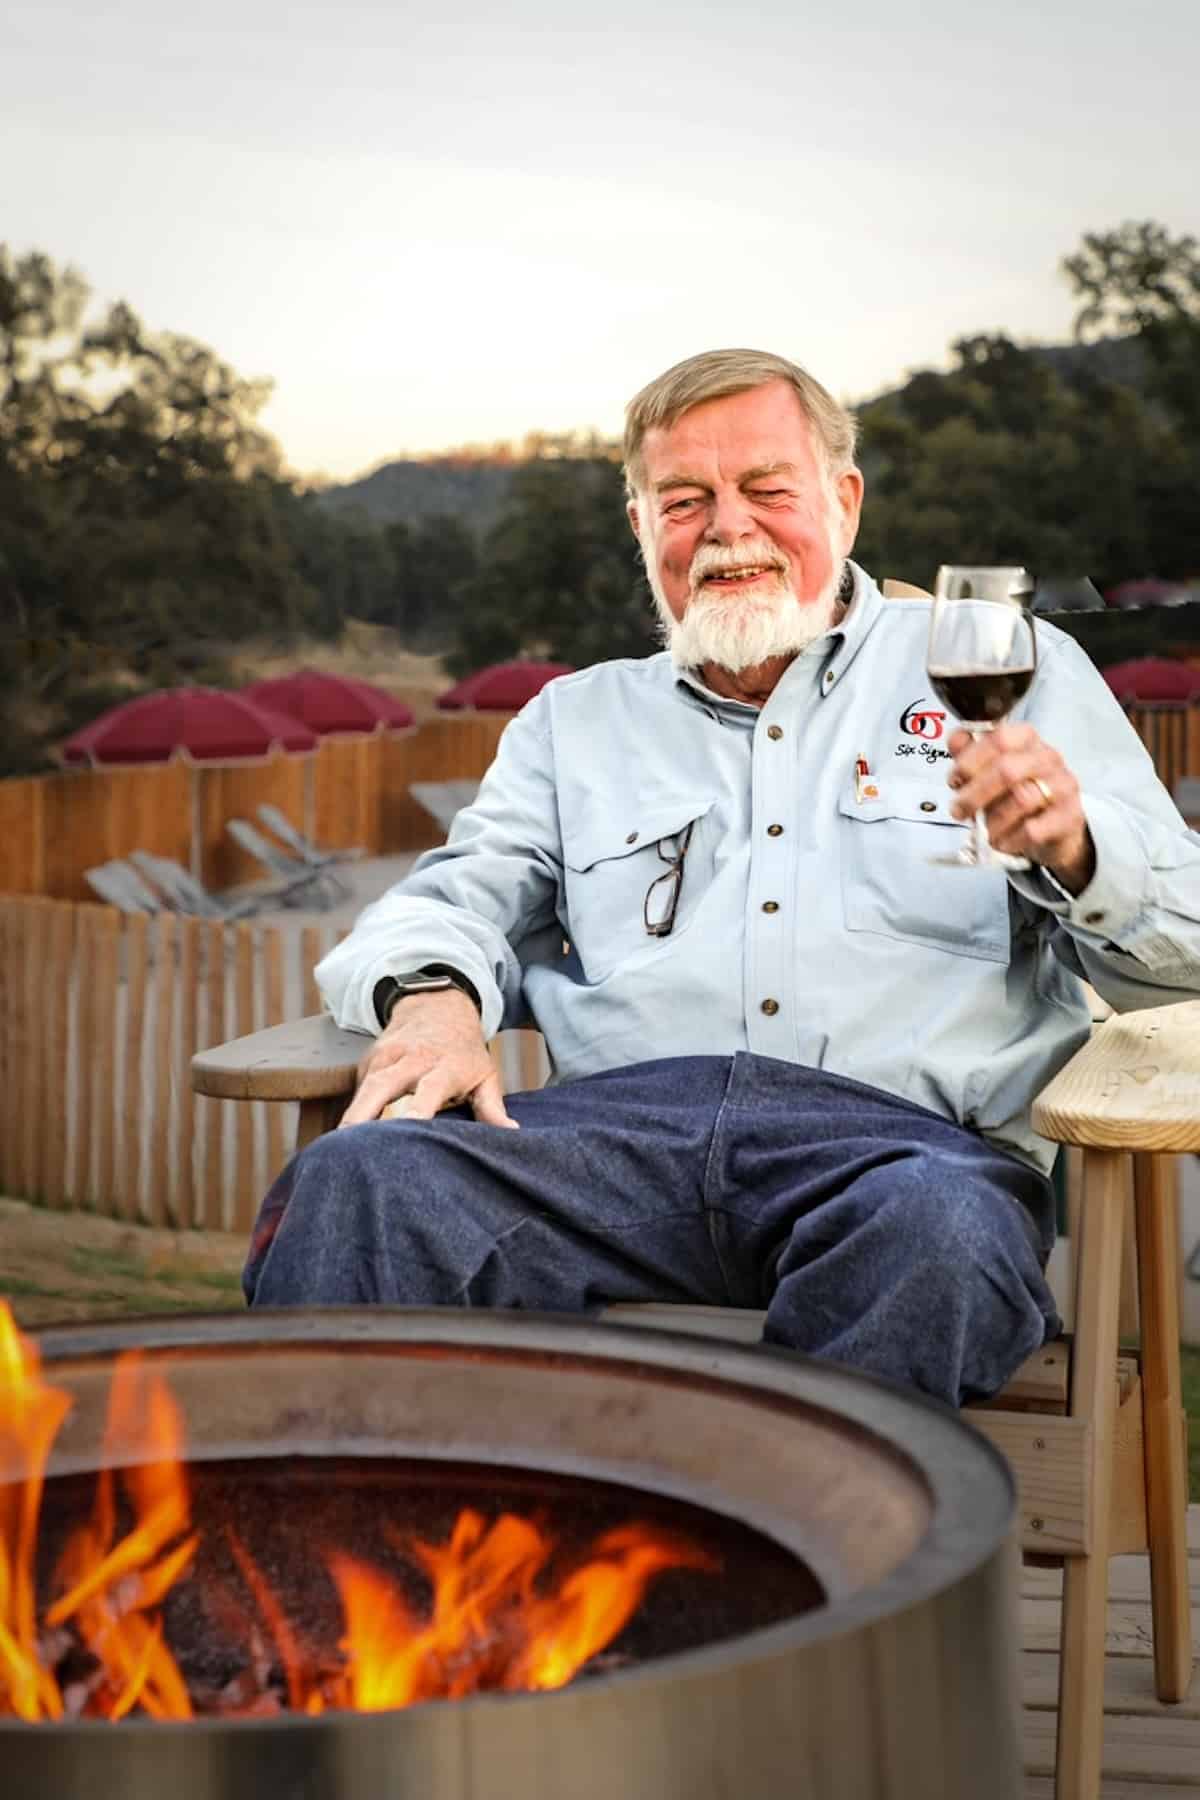 Man seated in front of a fire pit holding a glass of red wine.